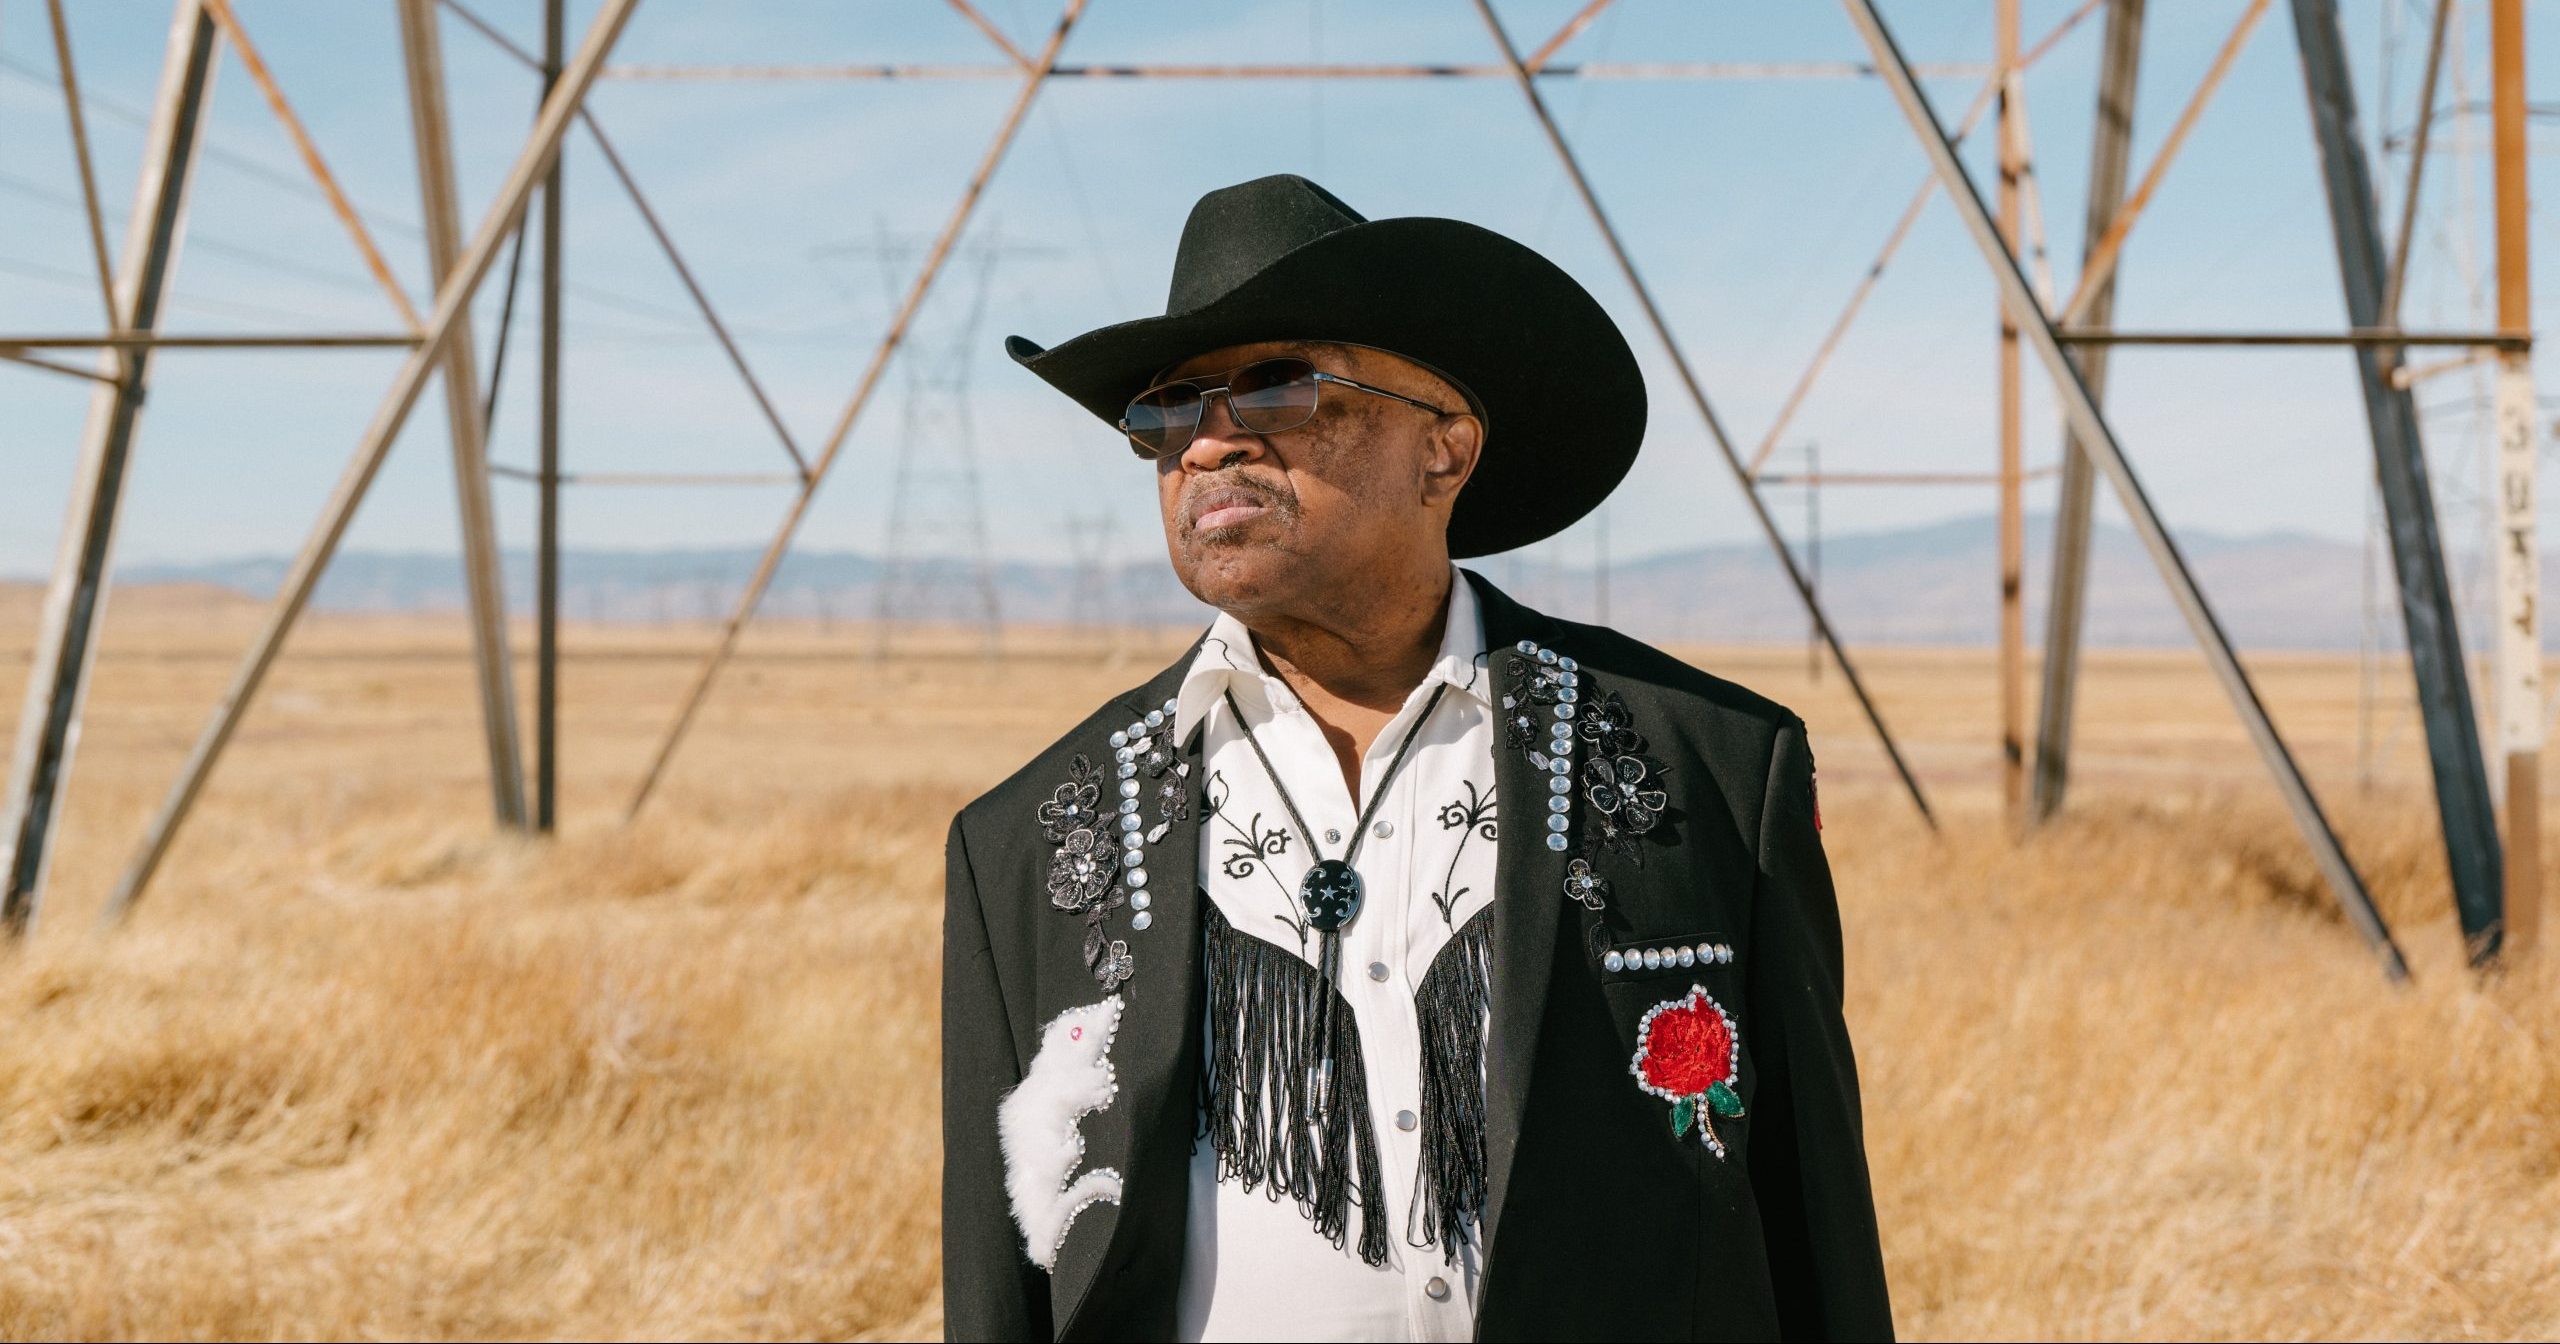 WATCH: Go Behind the Scenes of Swamp Dogg's 'Sorry You Couldn't Make It'